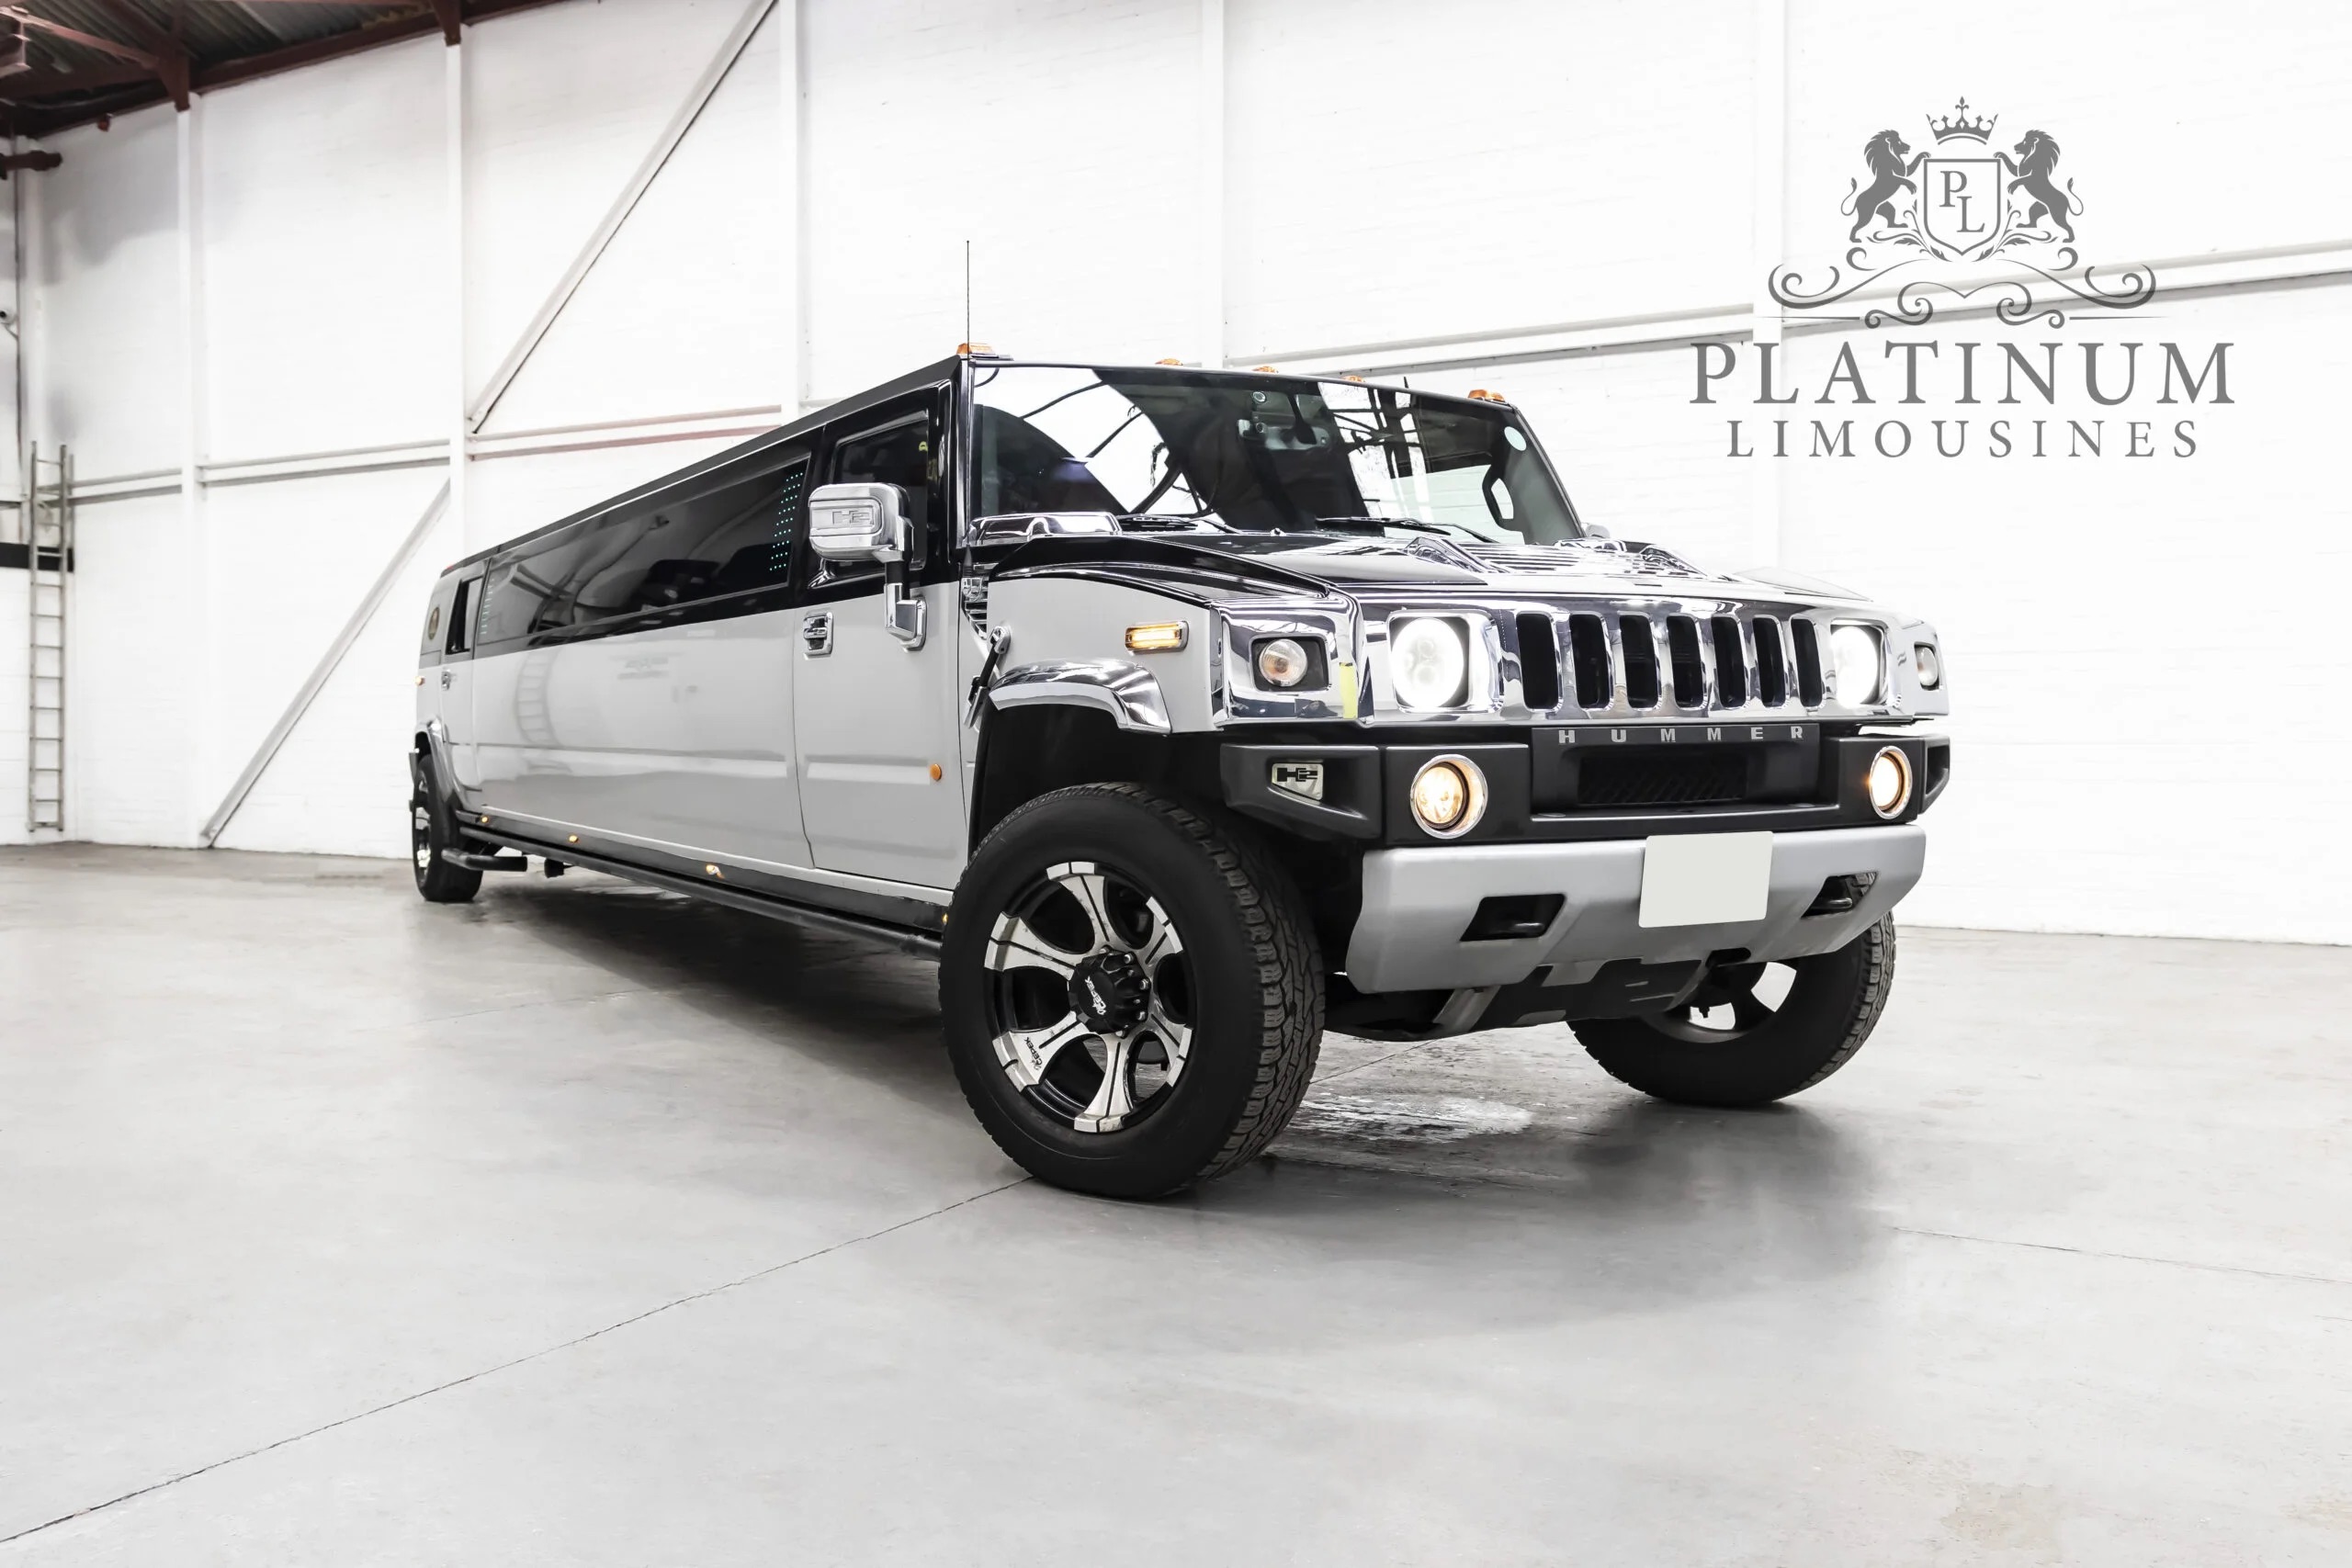 Why Hire a Hummer Limo for Special Events in Watford